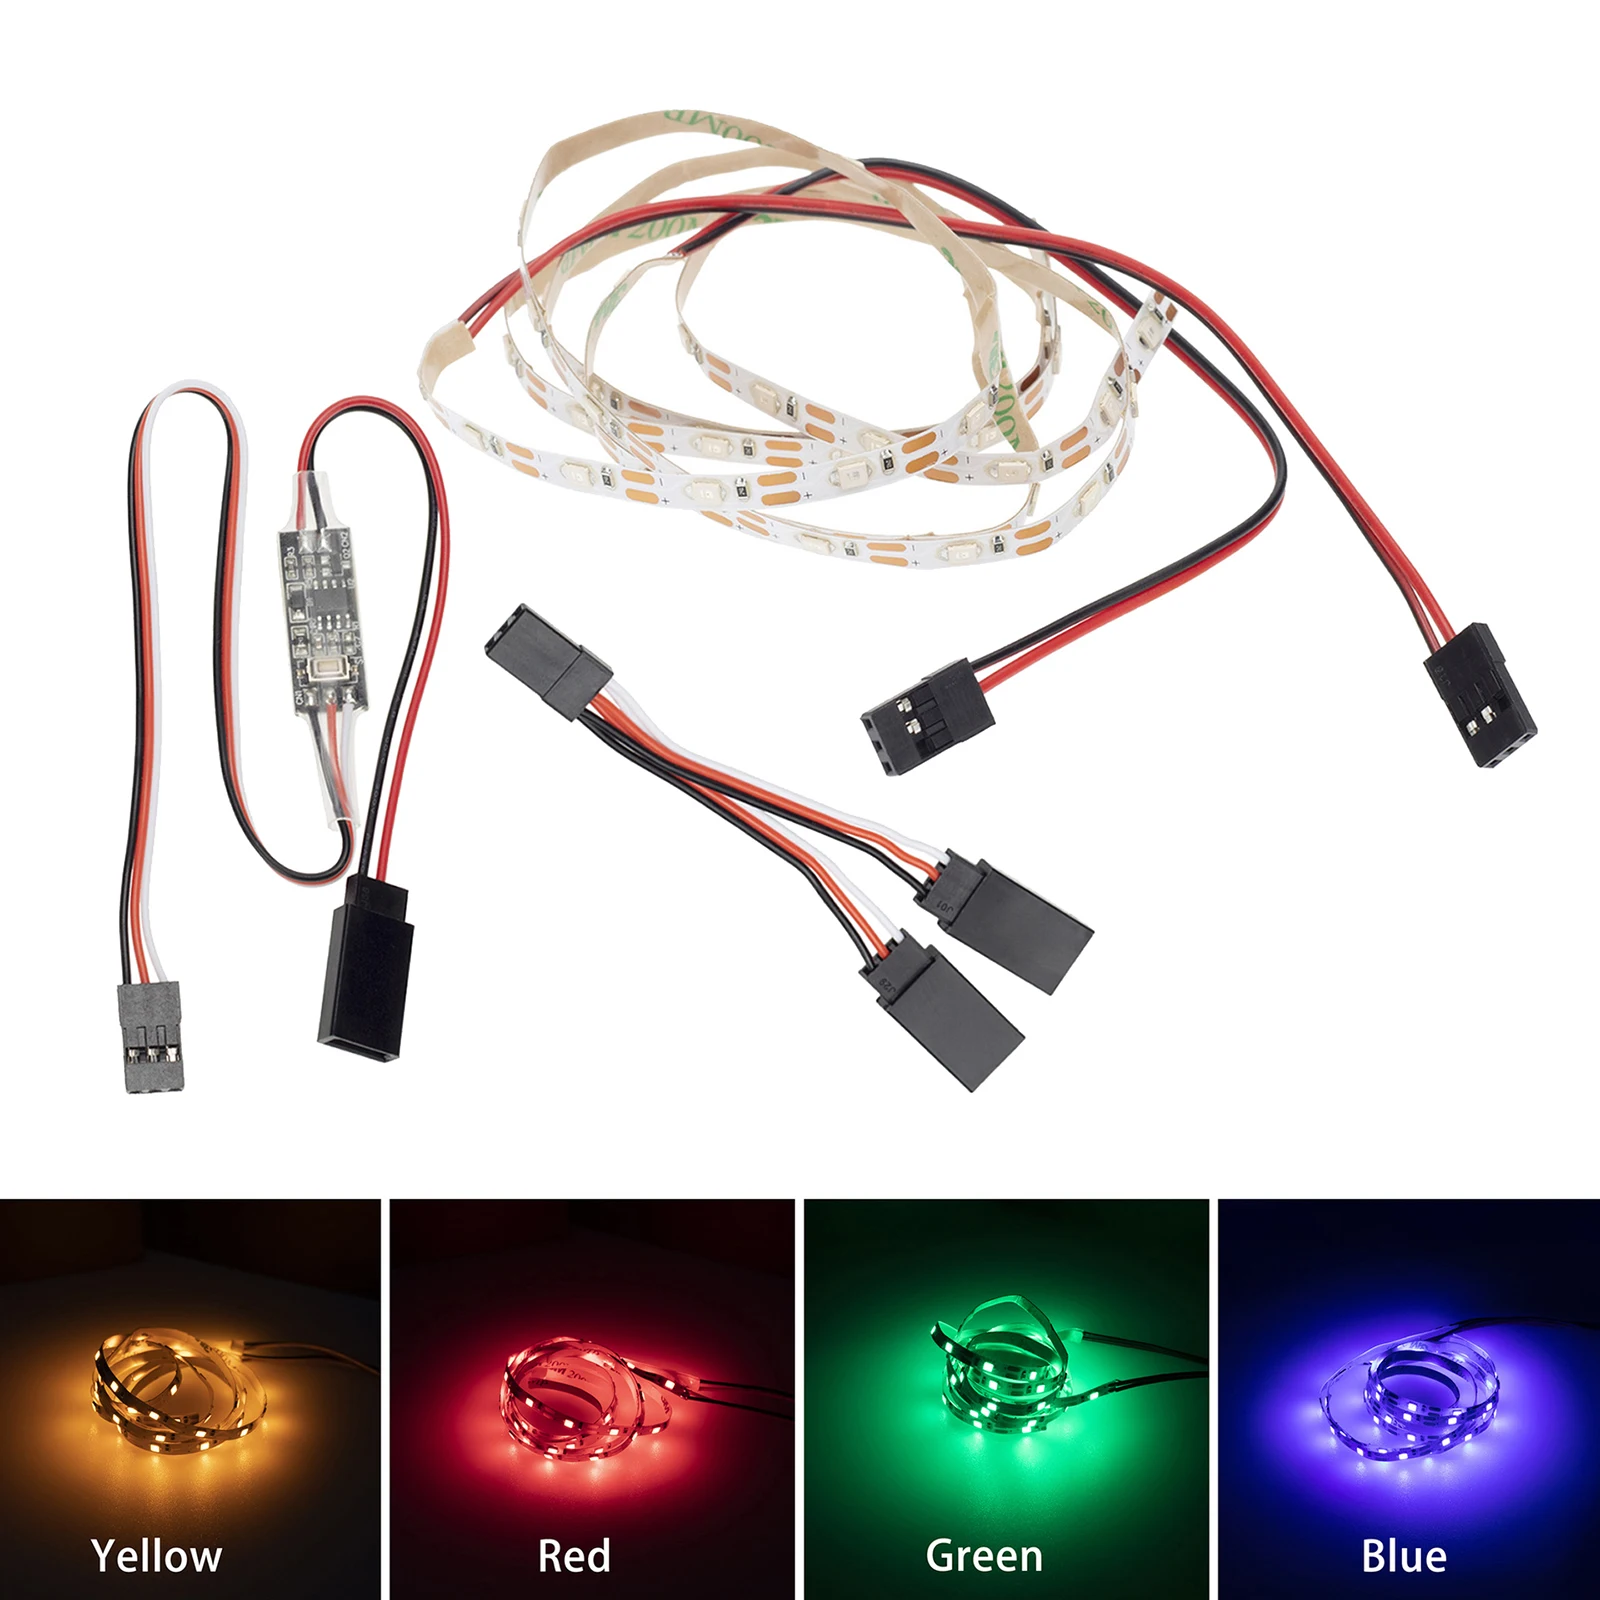 0.5m LED Light Strip With Controller Y-cable Super Brightness for RC Fixed Wing Airplane Flying Wing Plane